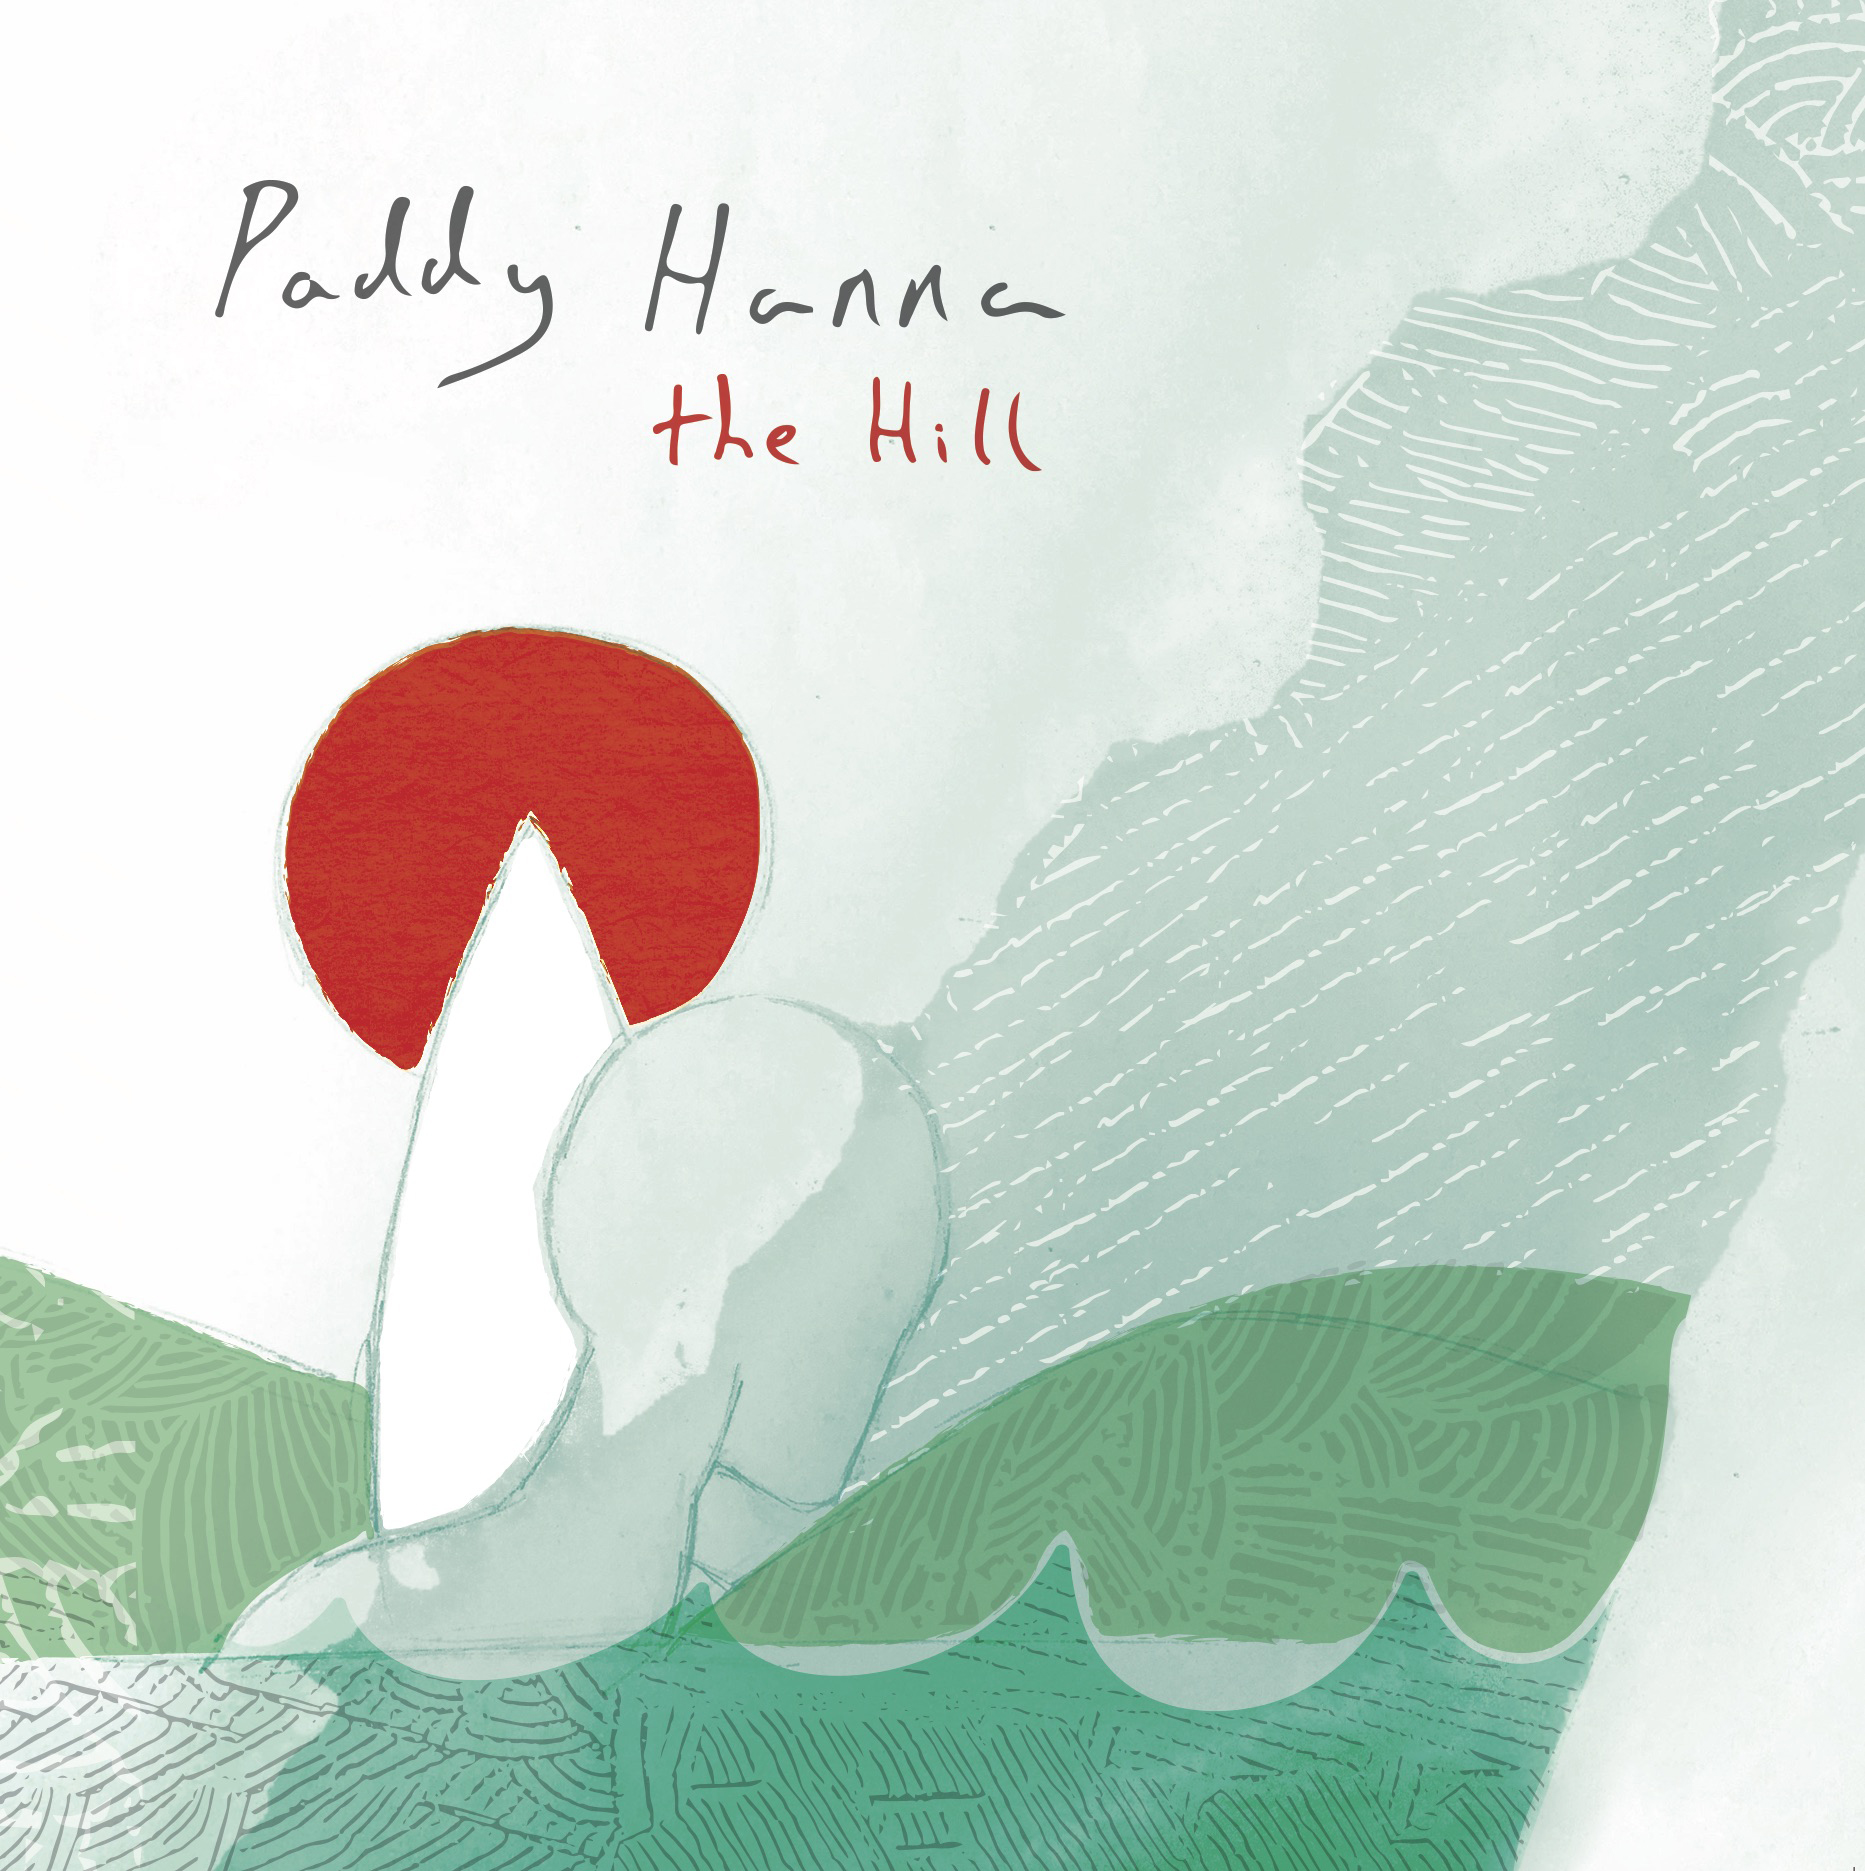 ALBUM REVIEW: Paddy Hanna - The Hill 